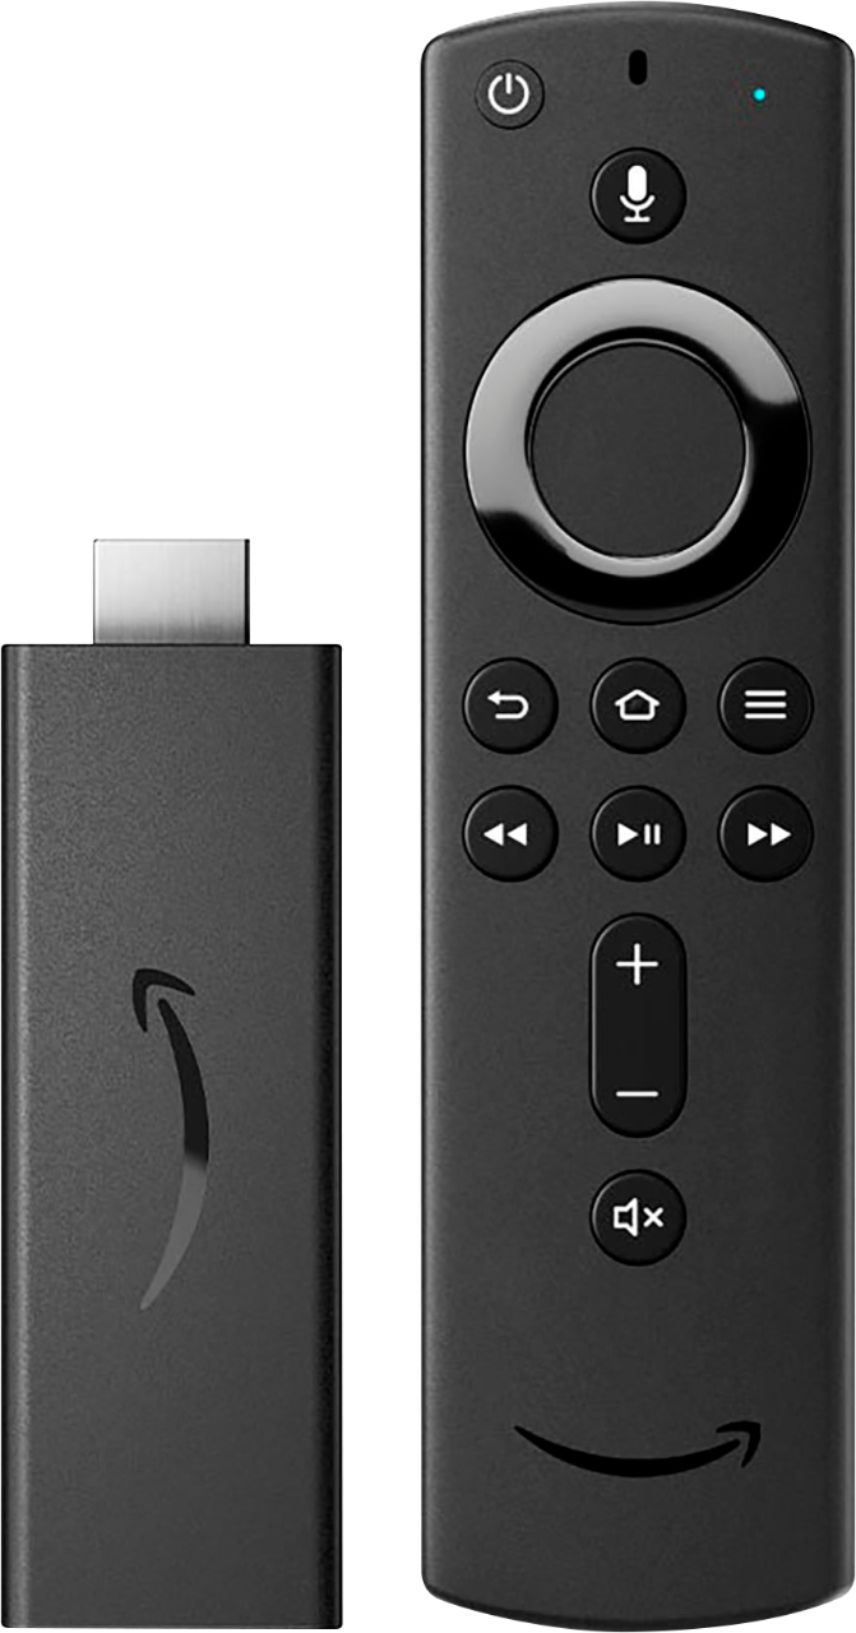 Amazon Fire TV Stick with Alexa Voice Remote and controls (includes TV  controls) | HD streaming device Black B07ZZVX1F2 - Best Buy